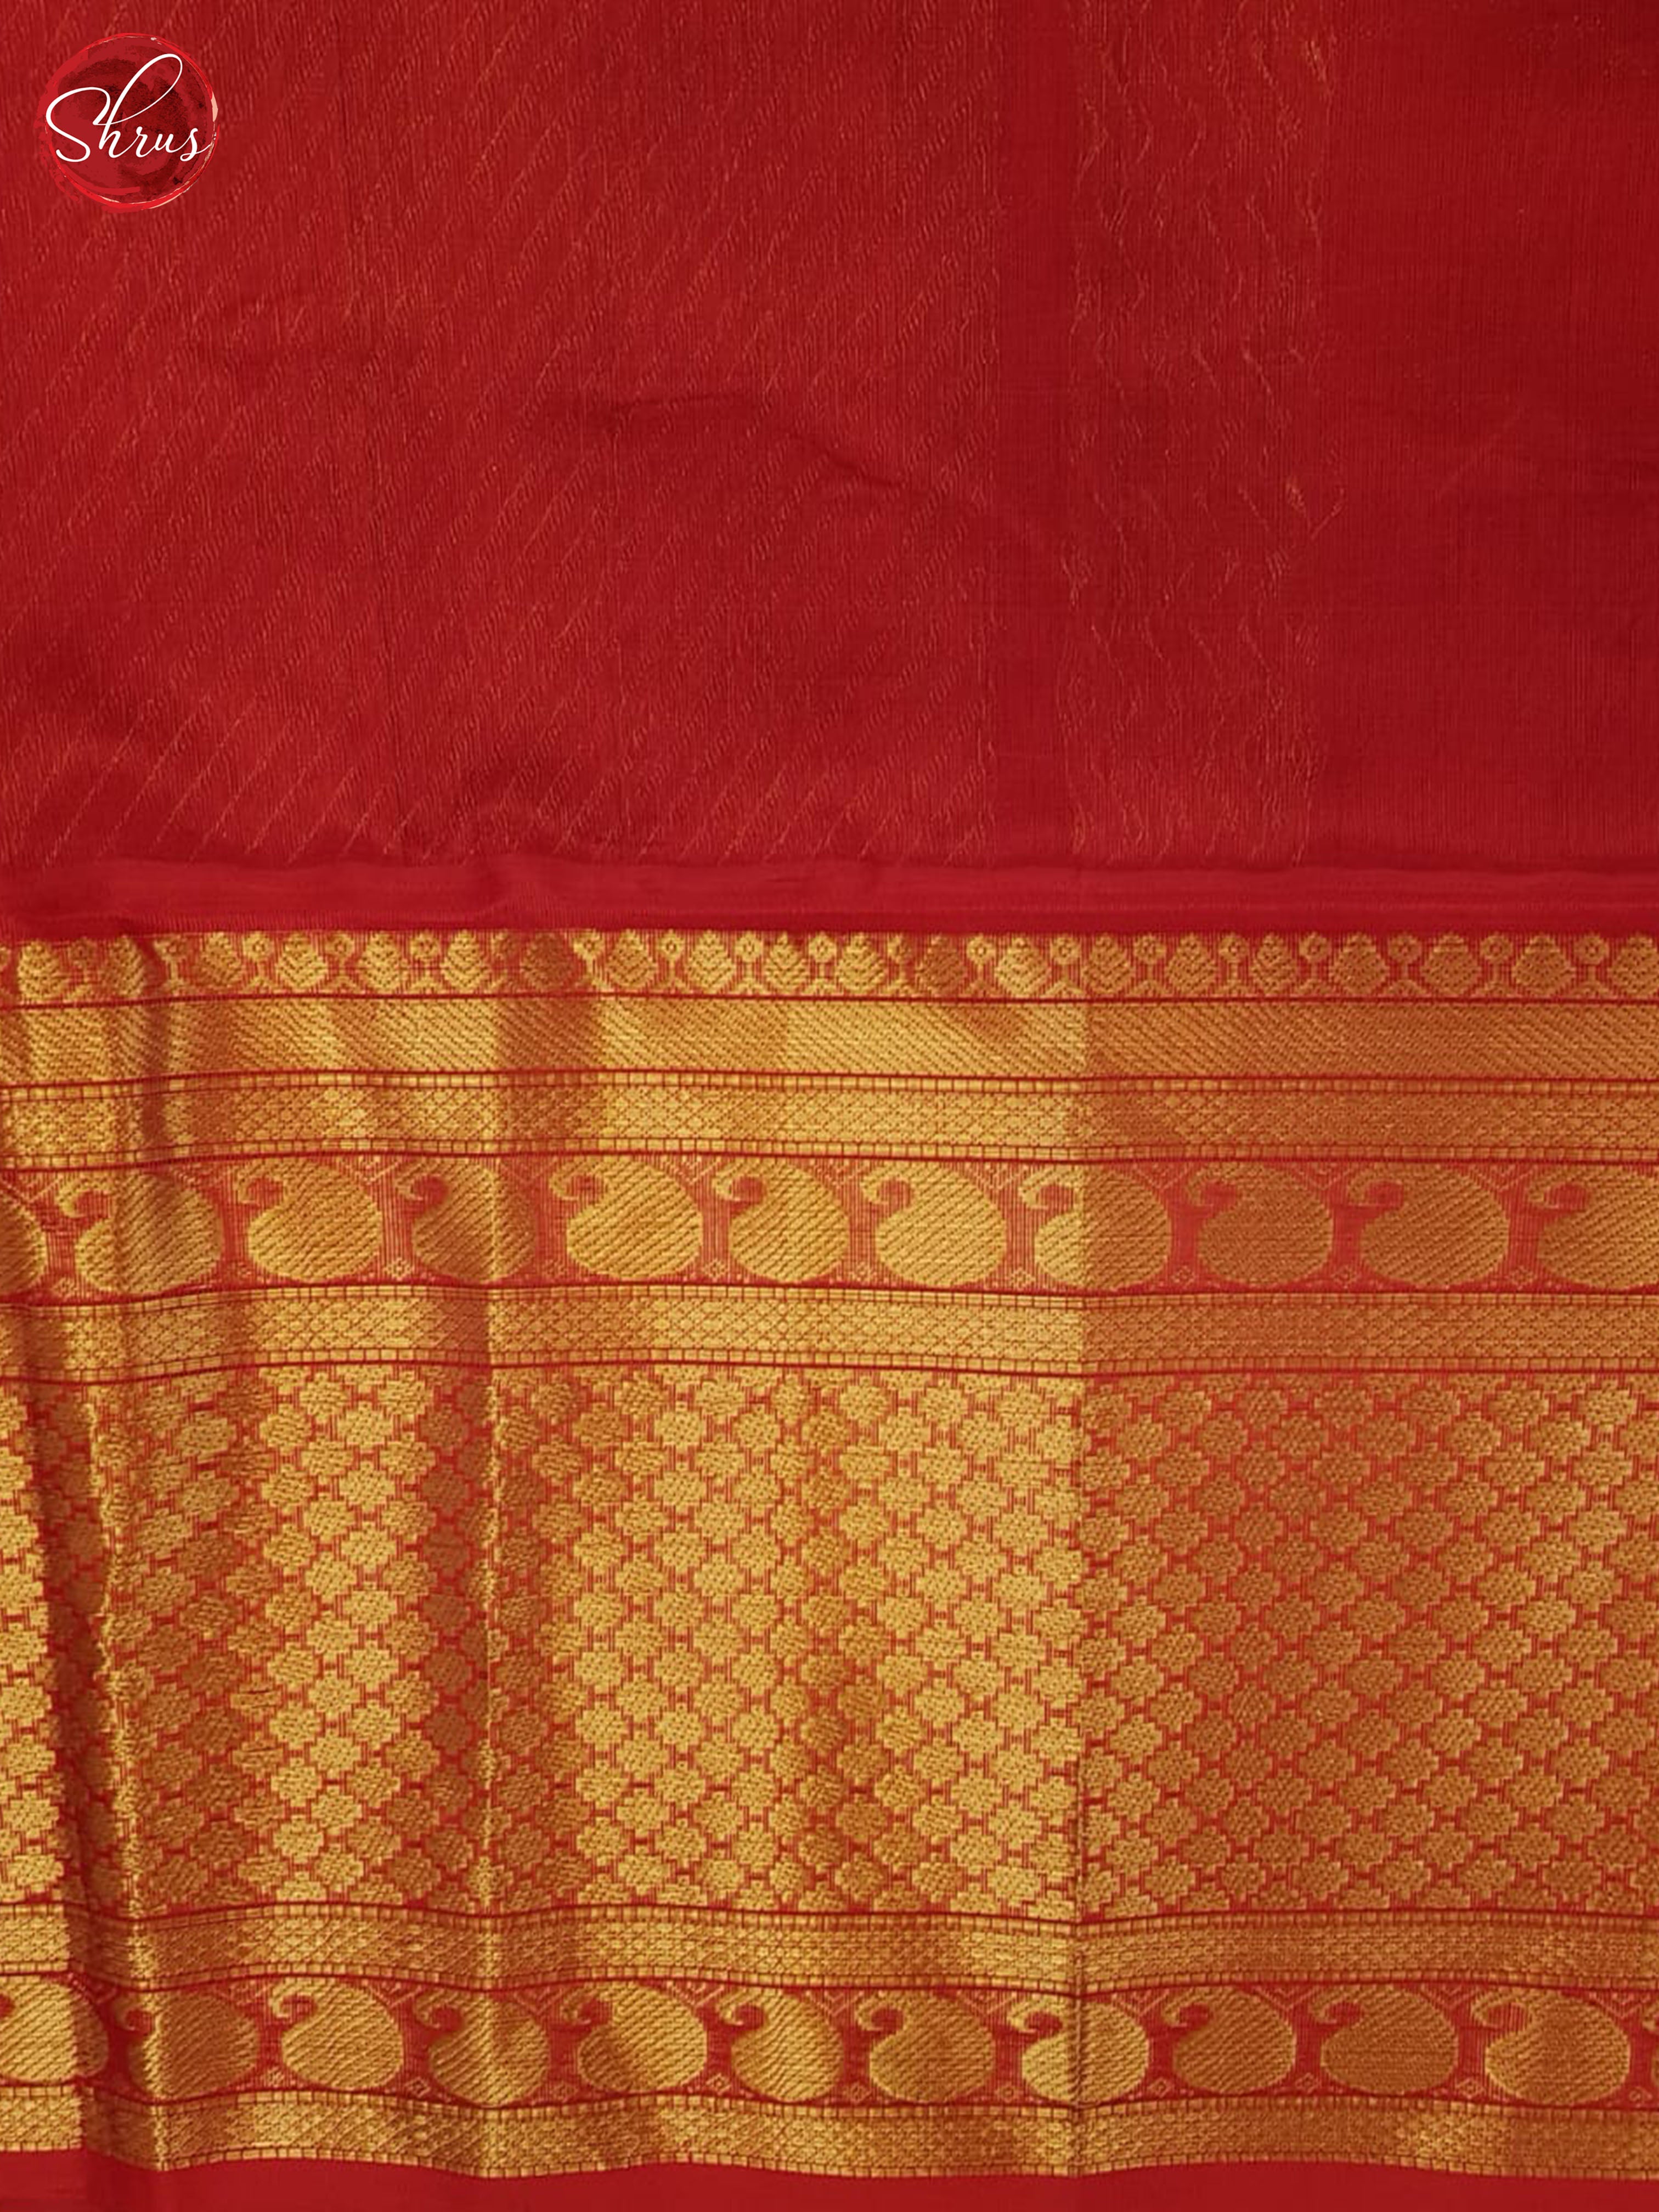 Green And Red- Silk cotton saree - Shop on ShrusEternity.com